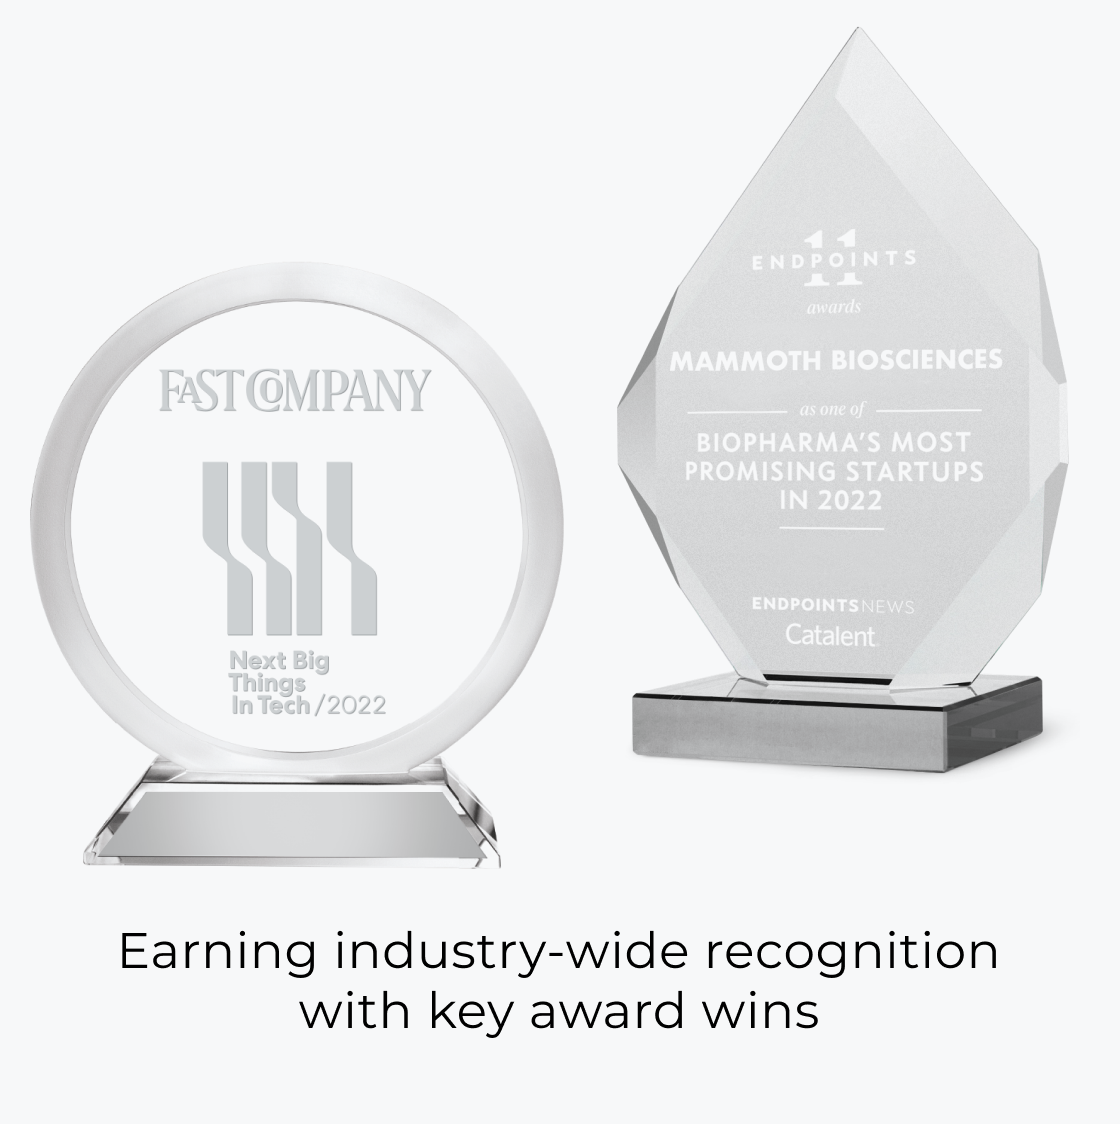 Two awards from Fast Company and Endpoints are displayed. Text: Earning industry-wide recognition with key award wins.